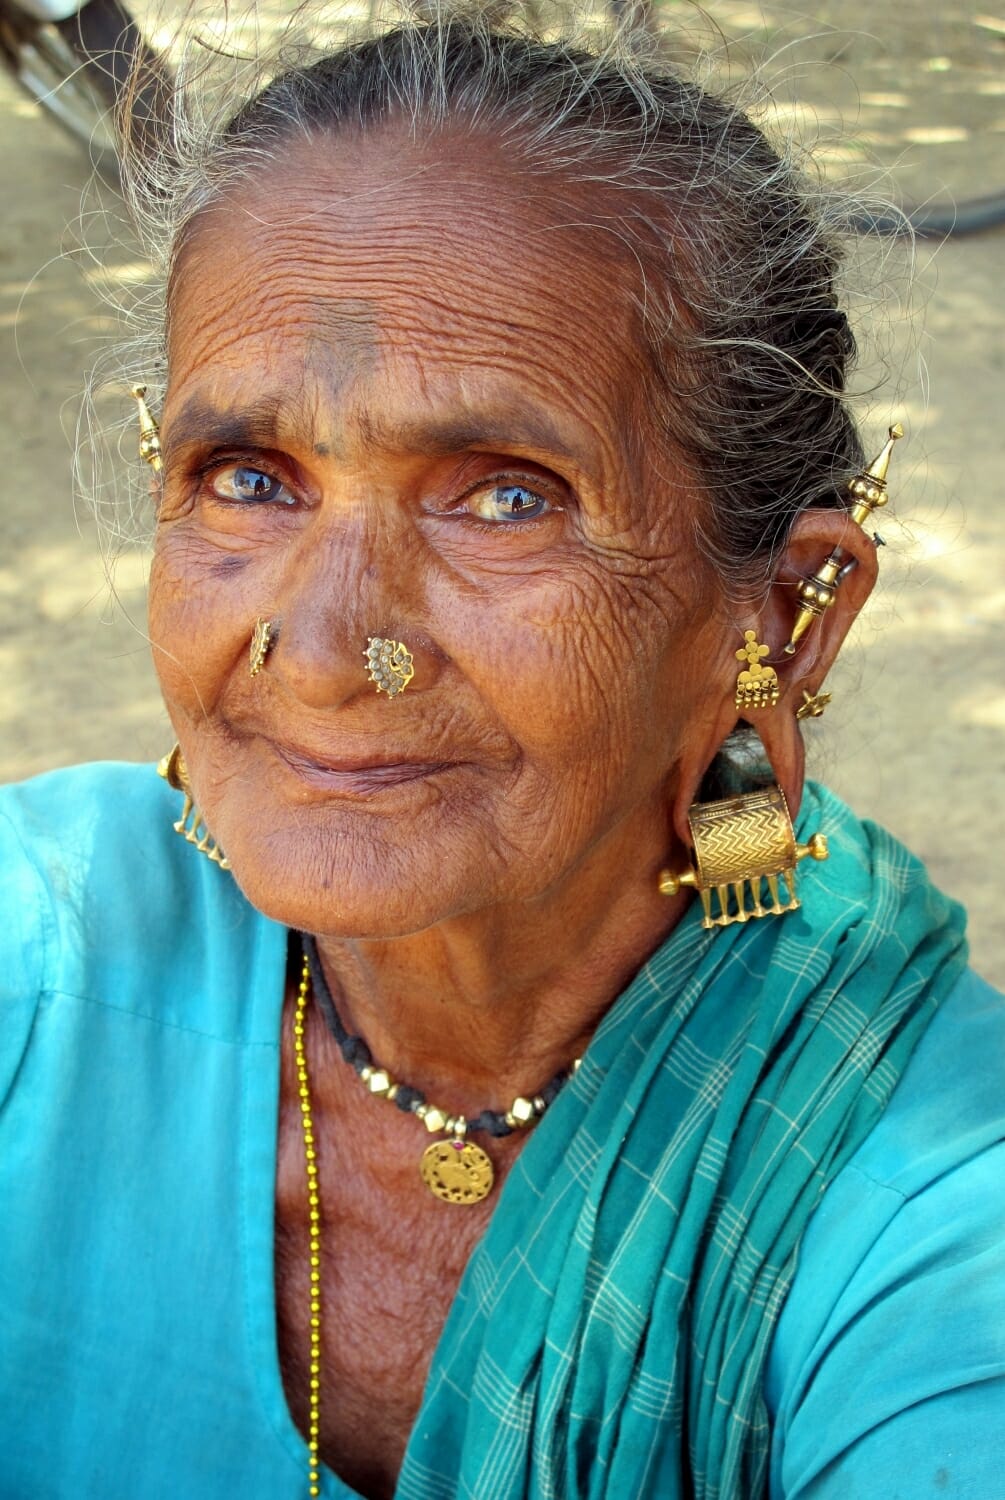 <span style="font-weight:normal;">Woman with Earrings, Vengitagulam, 2012</span>